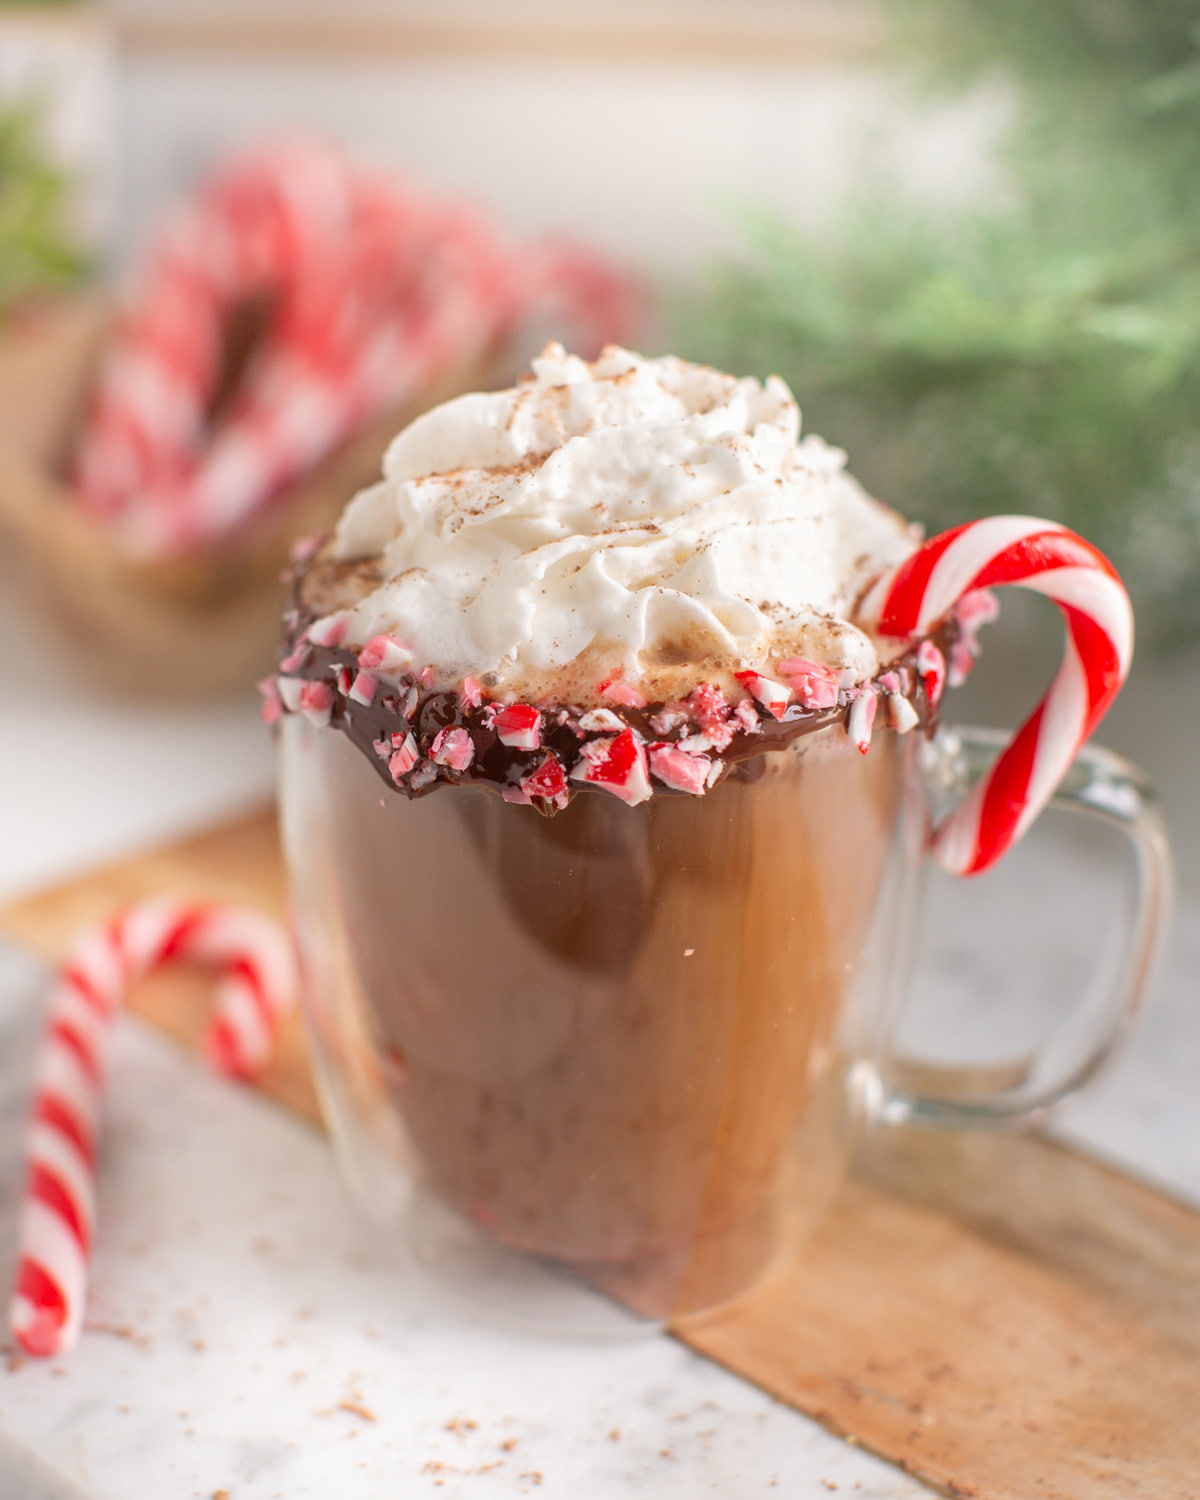 Dairy-free peppermint mocha in a glass mug with coconut whipped cream on top.